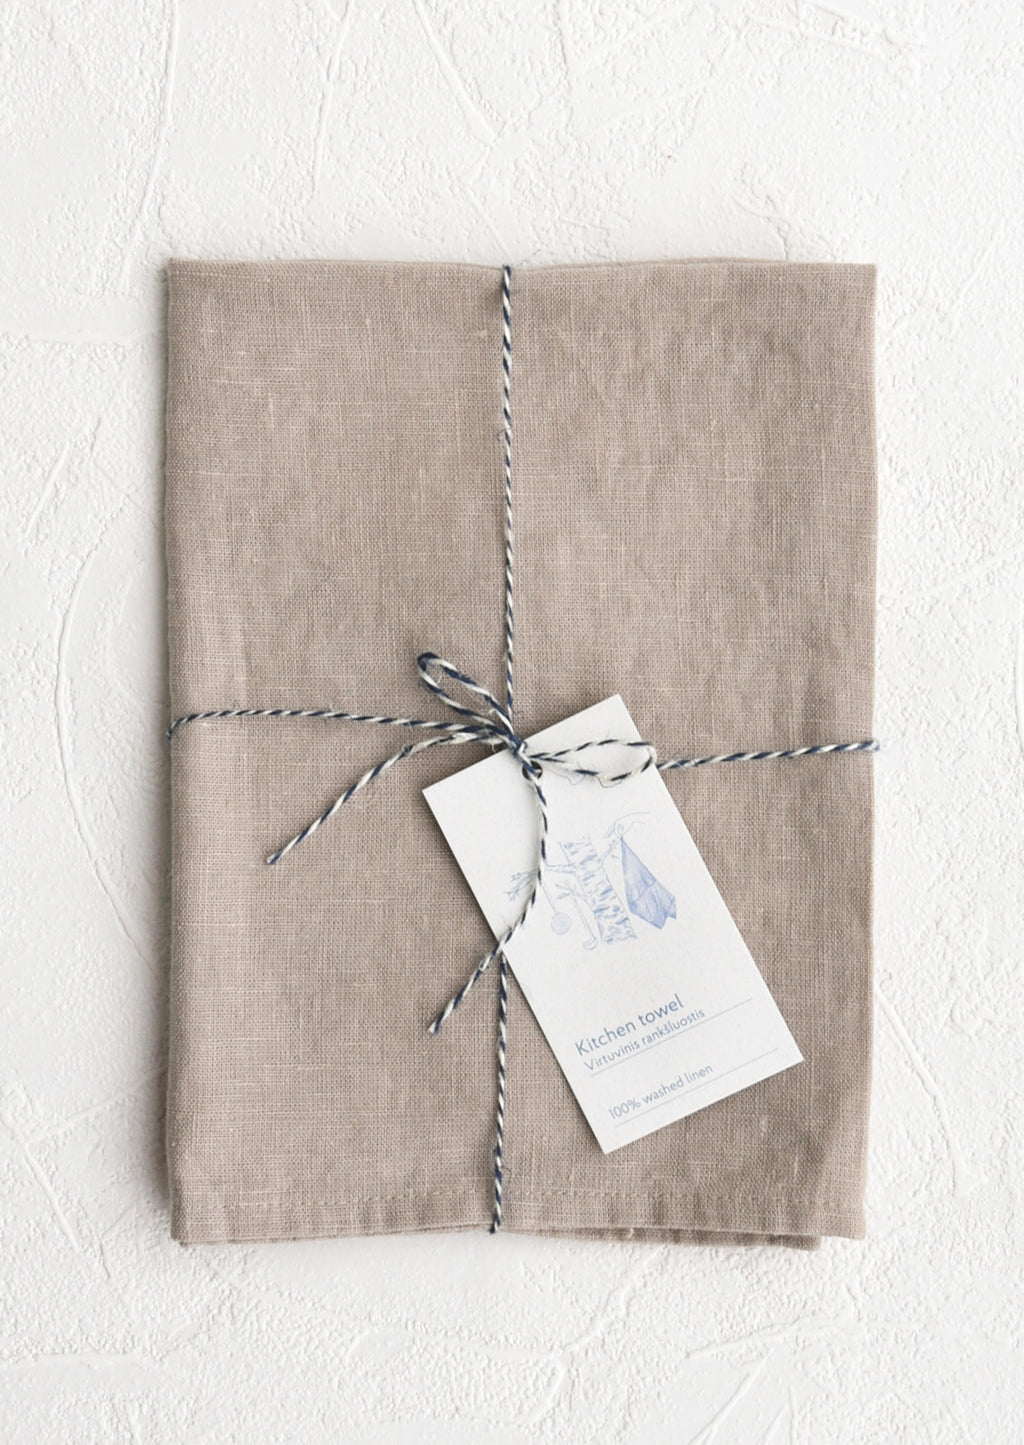 Antique Mauve: A folded faded pale mauve linen tea towel tied in baker's twine with a decorative hangtag